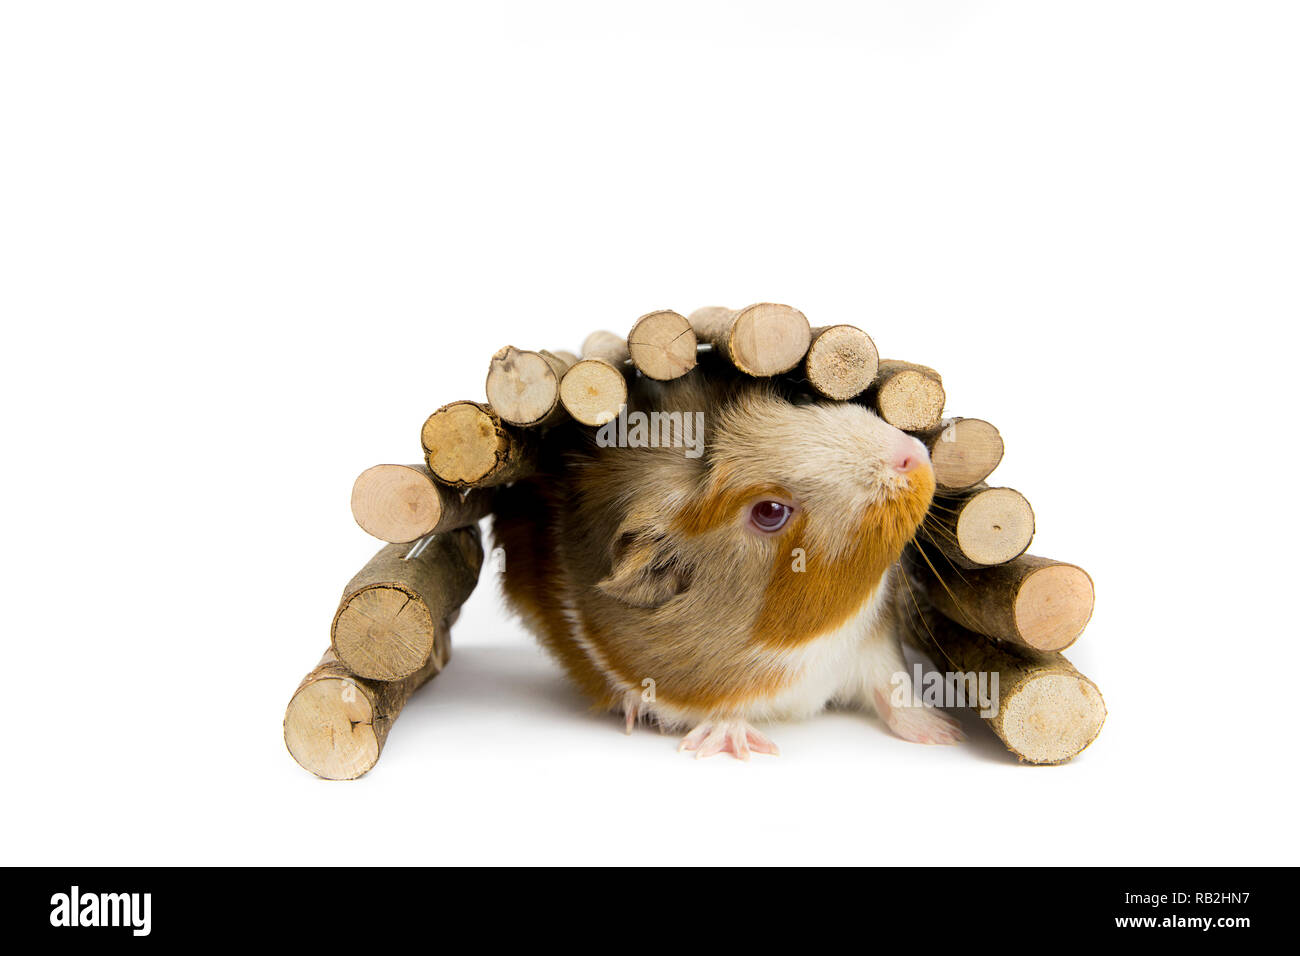 Domestic guinea pig (Cavia porcellus), also known as cavy or domestic cavy with wooden branch bridge isolated on white in studio. Stock Photo